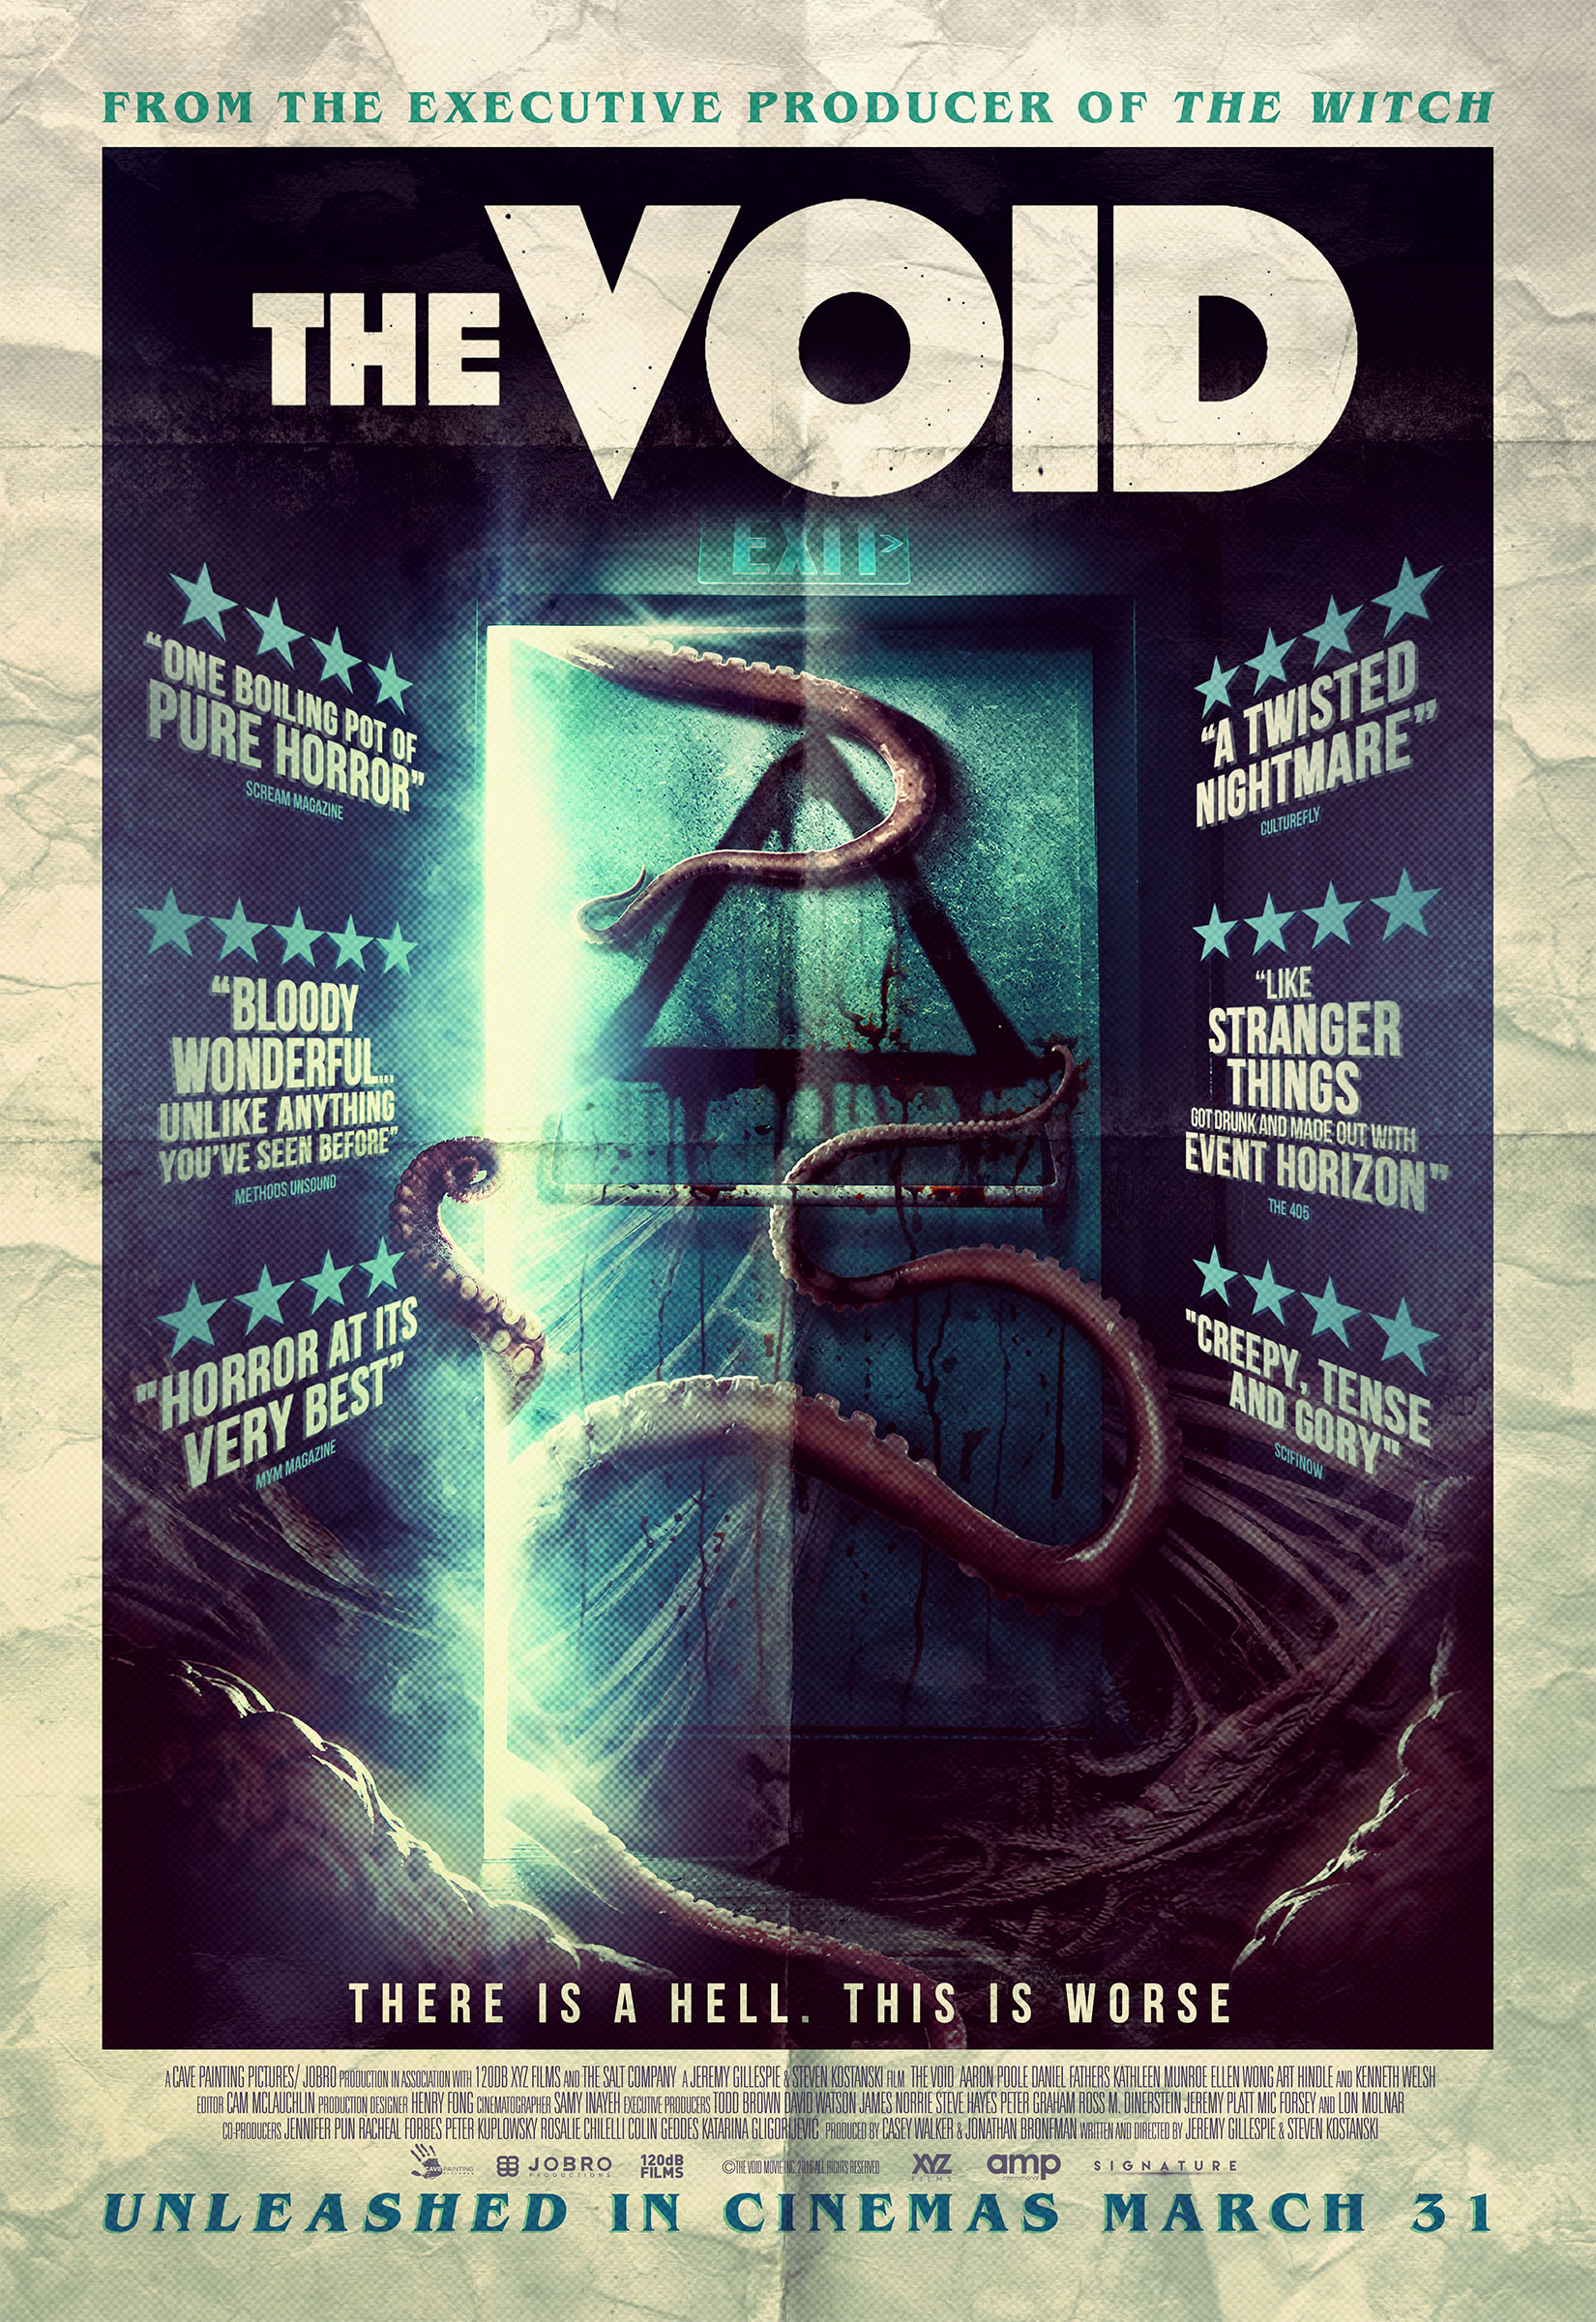 The Void film review: monsters, madness and dread